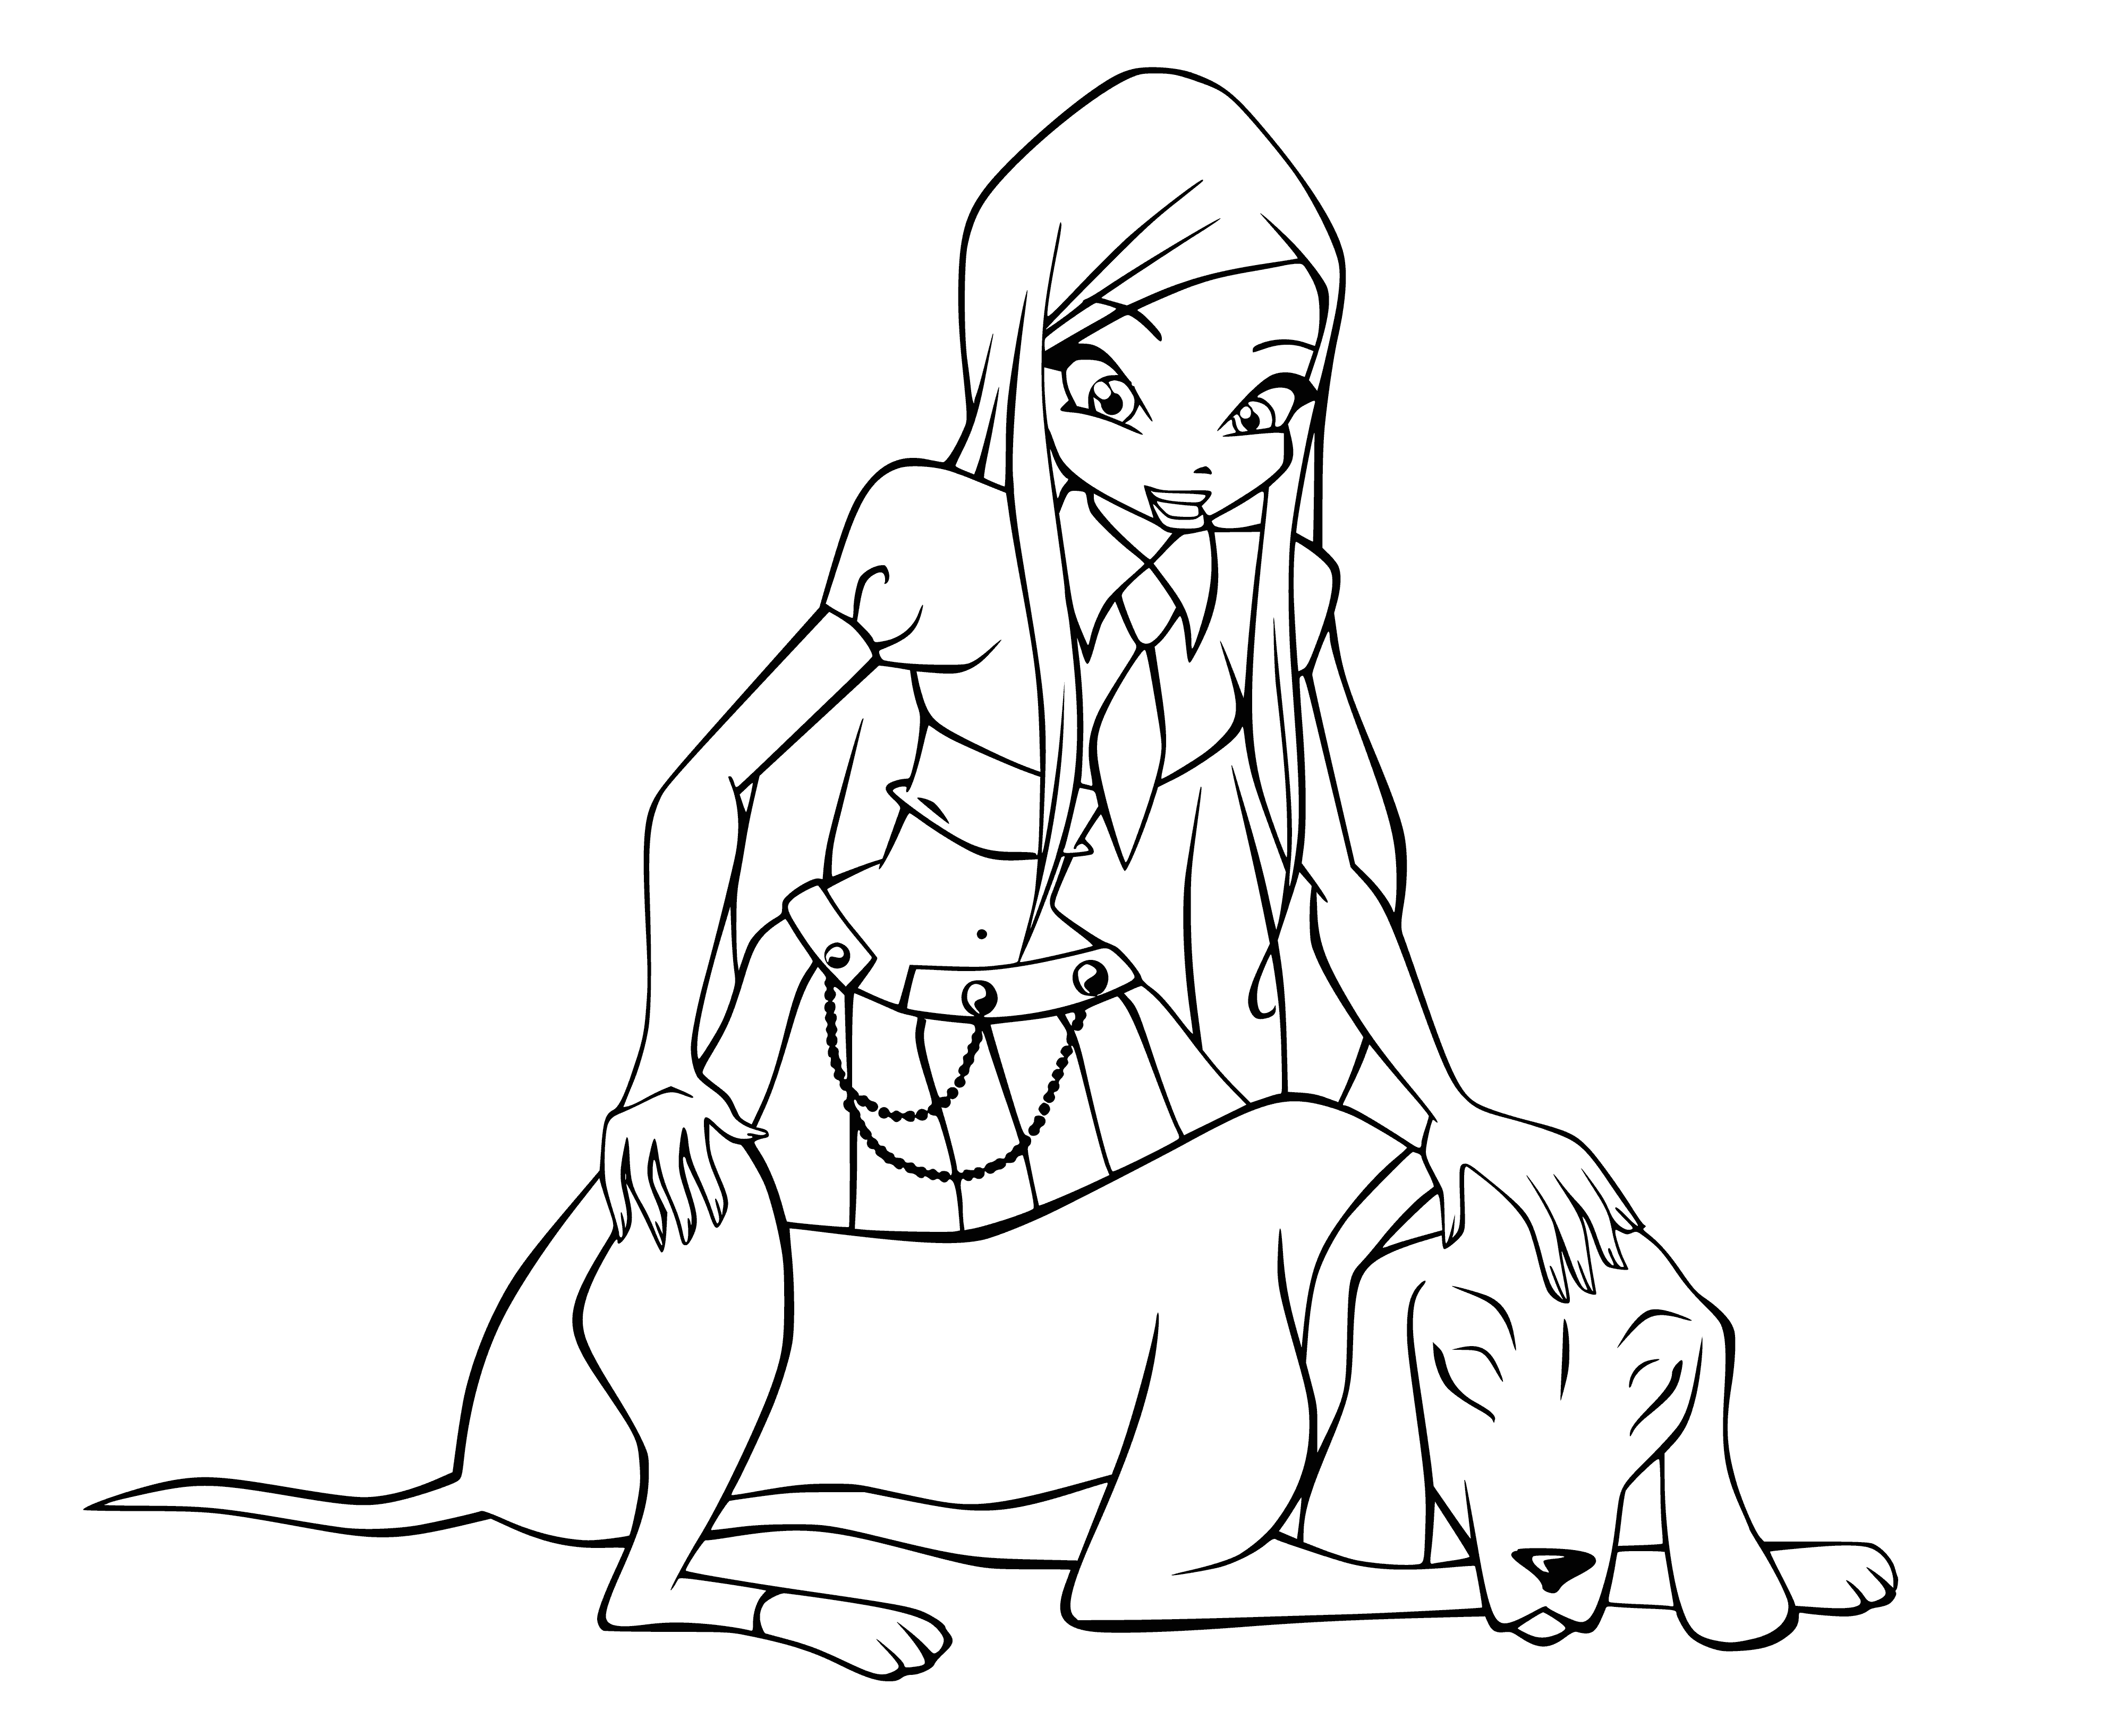 coloring page: Woman in blue dress on porch swing w/ dog, long brown hair; brown sandals complete the look.